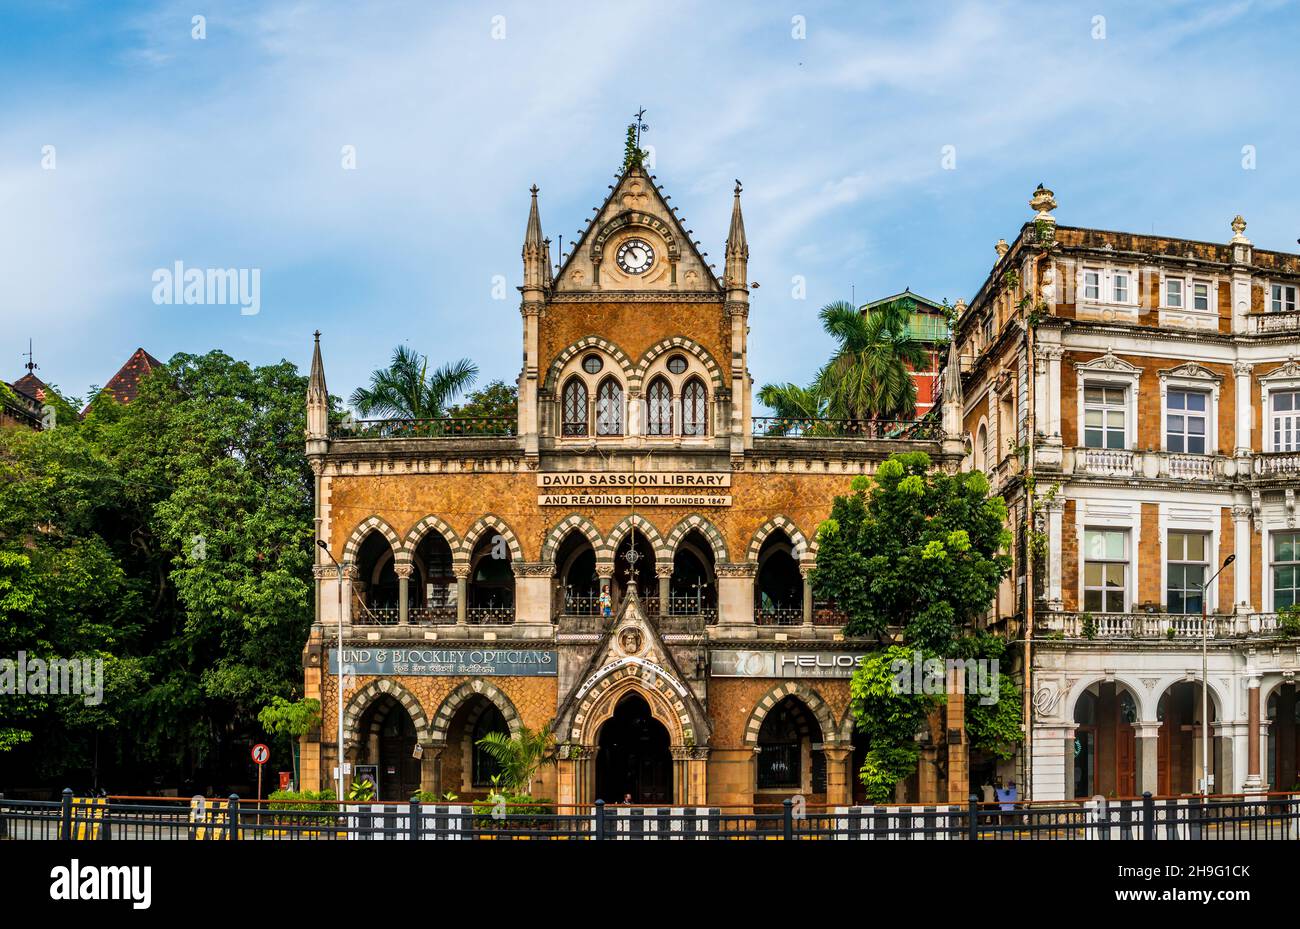 MUMBAI, INDIA - October 2, 2021  : The David Sassoon Library and Reading Room, the first building to come up at the southern end of the Esplanade, has Stock Photo